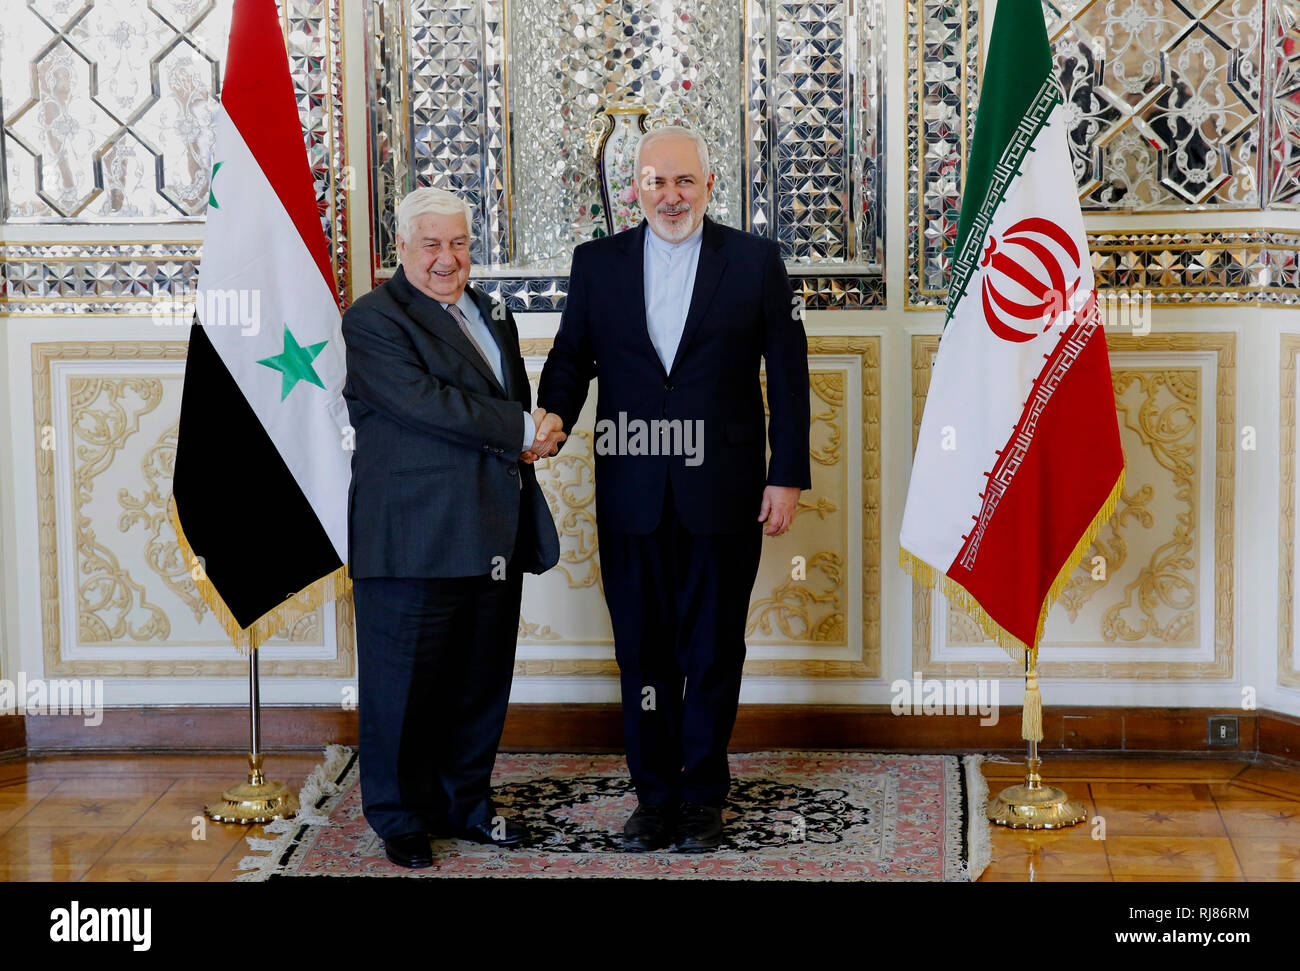 (190205) -- TEHRAN, Feb. 5, 2019 (Xinhua) -- Iranian Foreign Minister Mohammad Javad Zarif (R) shakes hands with visiting Syrian Foreign Minister Walid Muallem in Tehran, capital of Iran, on Feb. 5, 2019. Iran pledged on Tuesday full support to Syria facing threats from terrorists and Israel. (Xinhua/Ahmad Halabisaz) Stock Photo